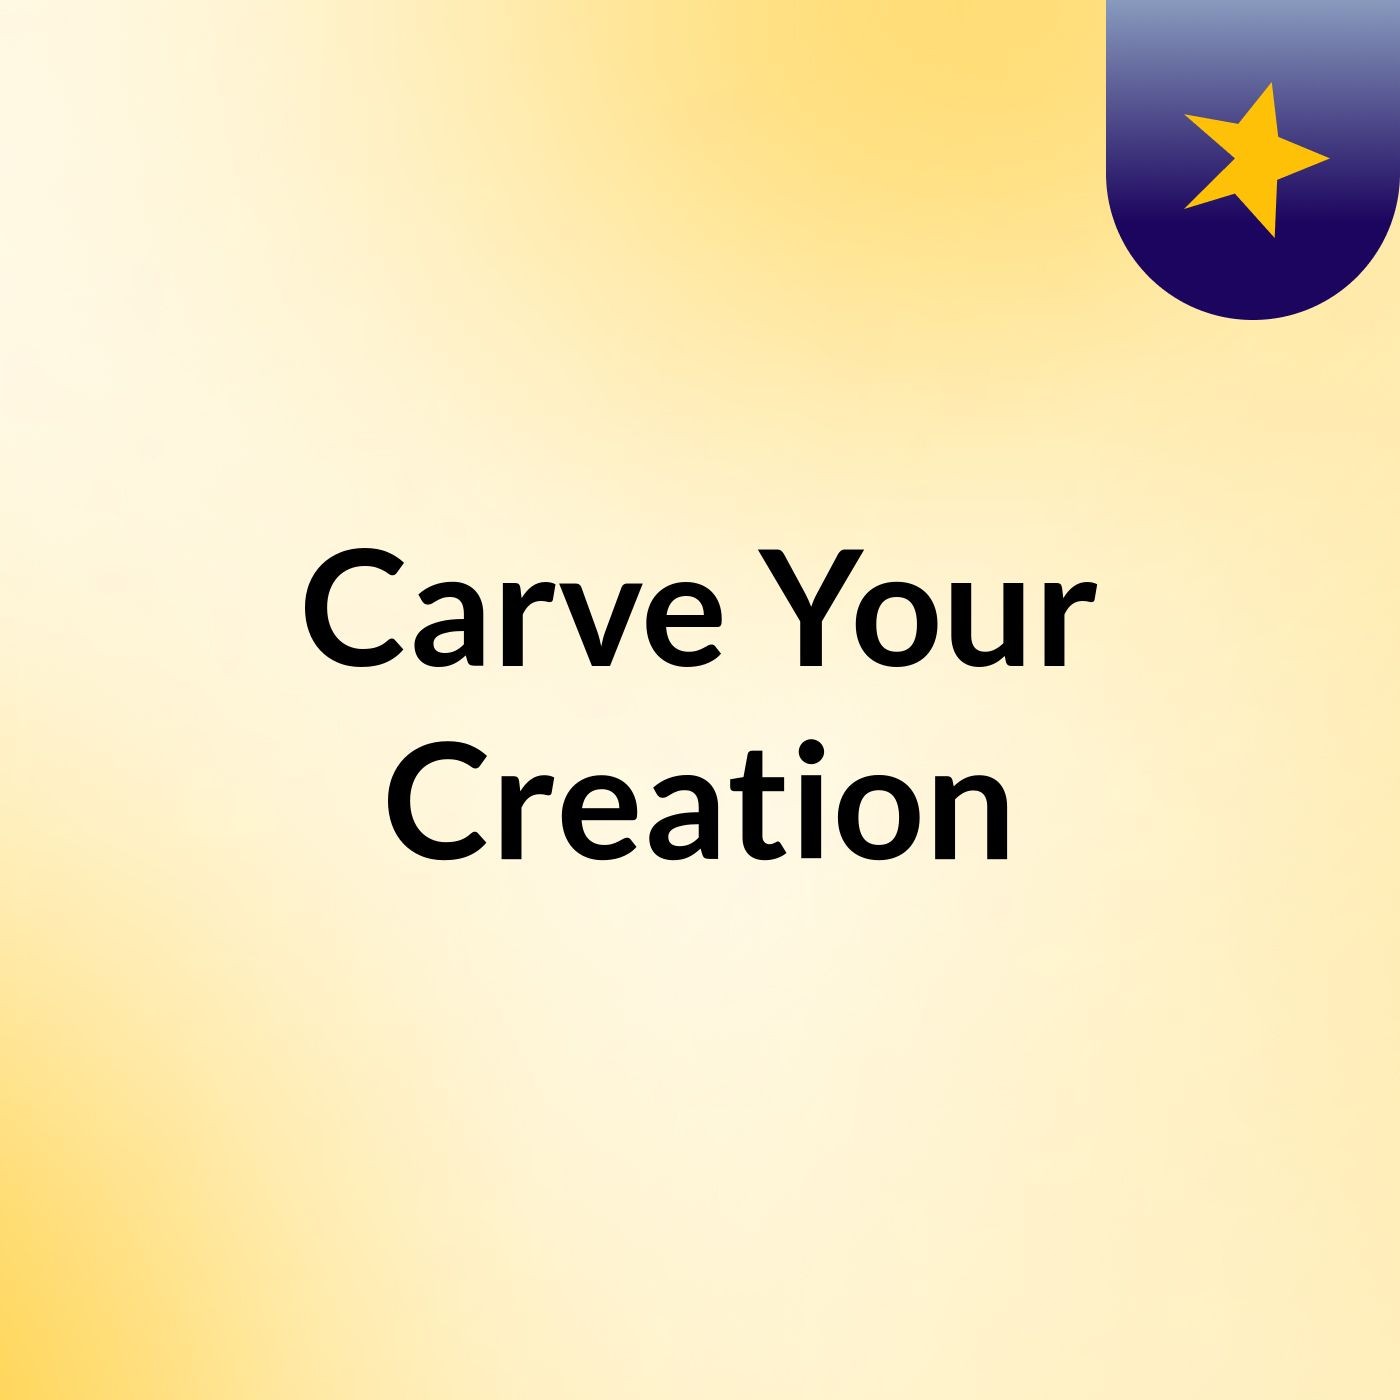 Carve Your Creation